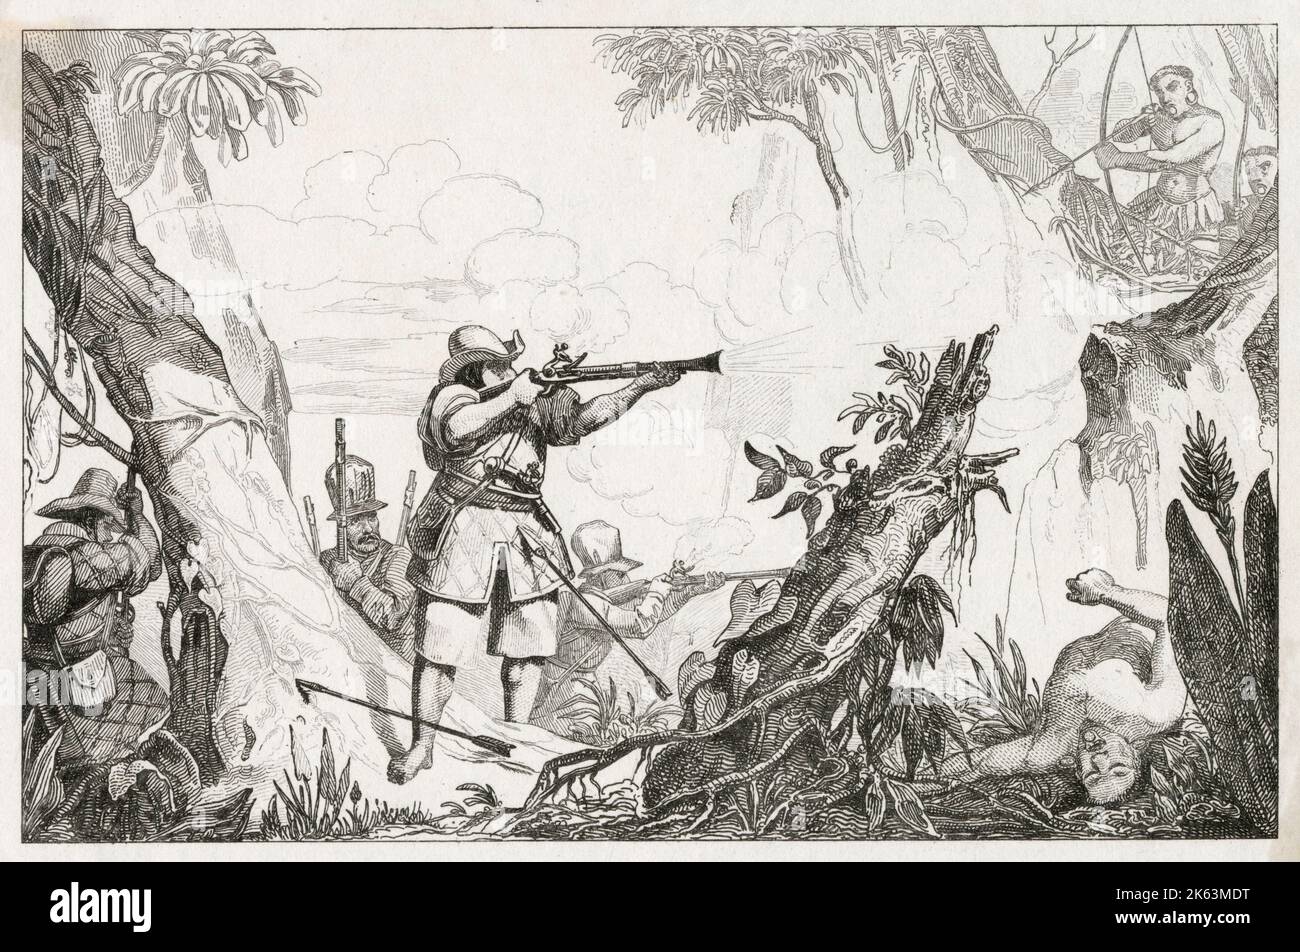 In fighting between the Portuguese and the natives, the musket proves its superiority to bows and arrows, despite the disparity of numbers     Date: circa 1600 Stock Photo